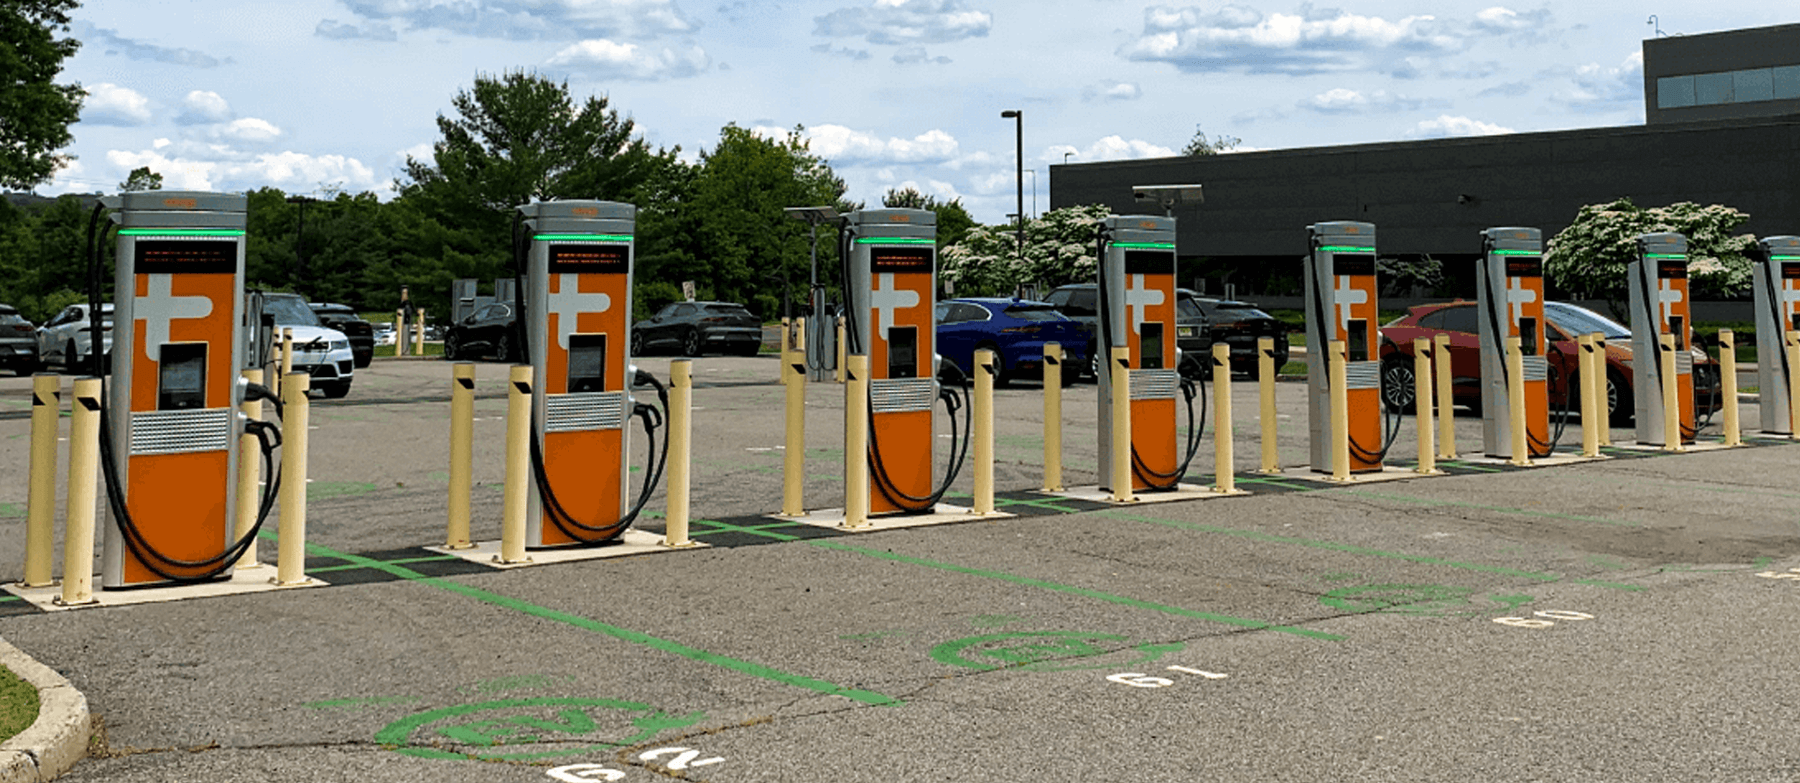 Photo of Eight Electric Vehicle Charging Stations in a Parking Lot